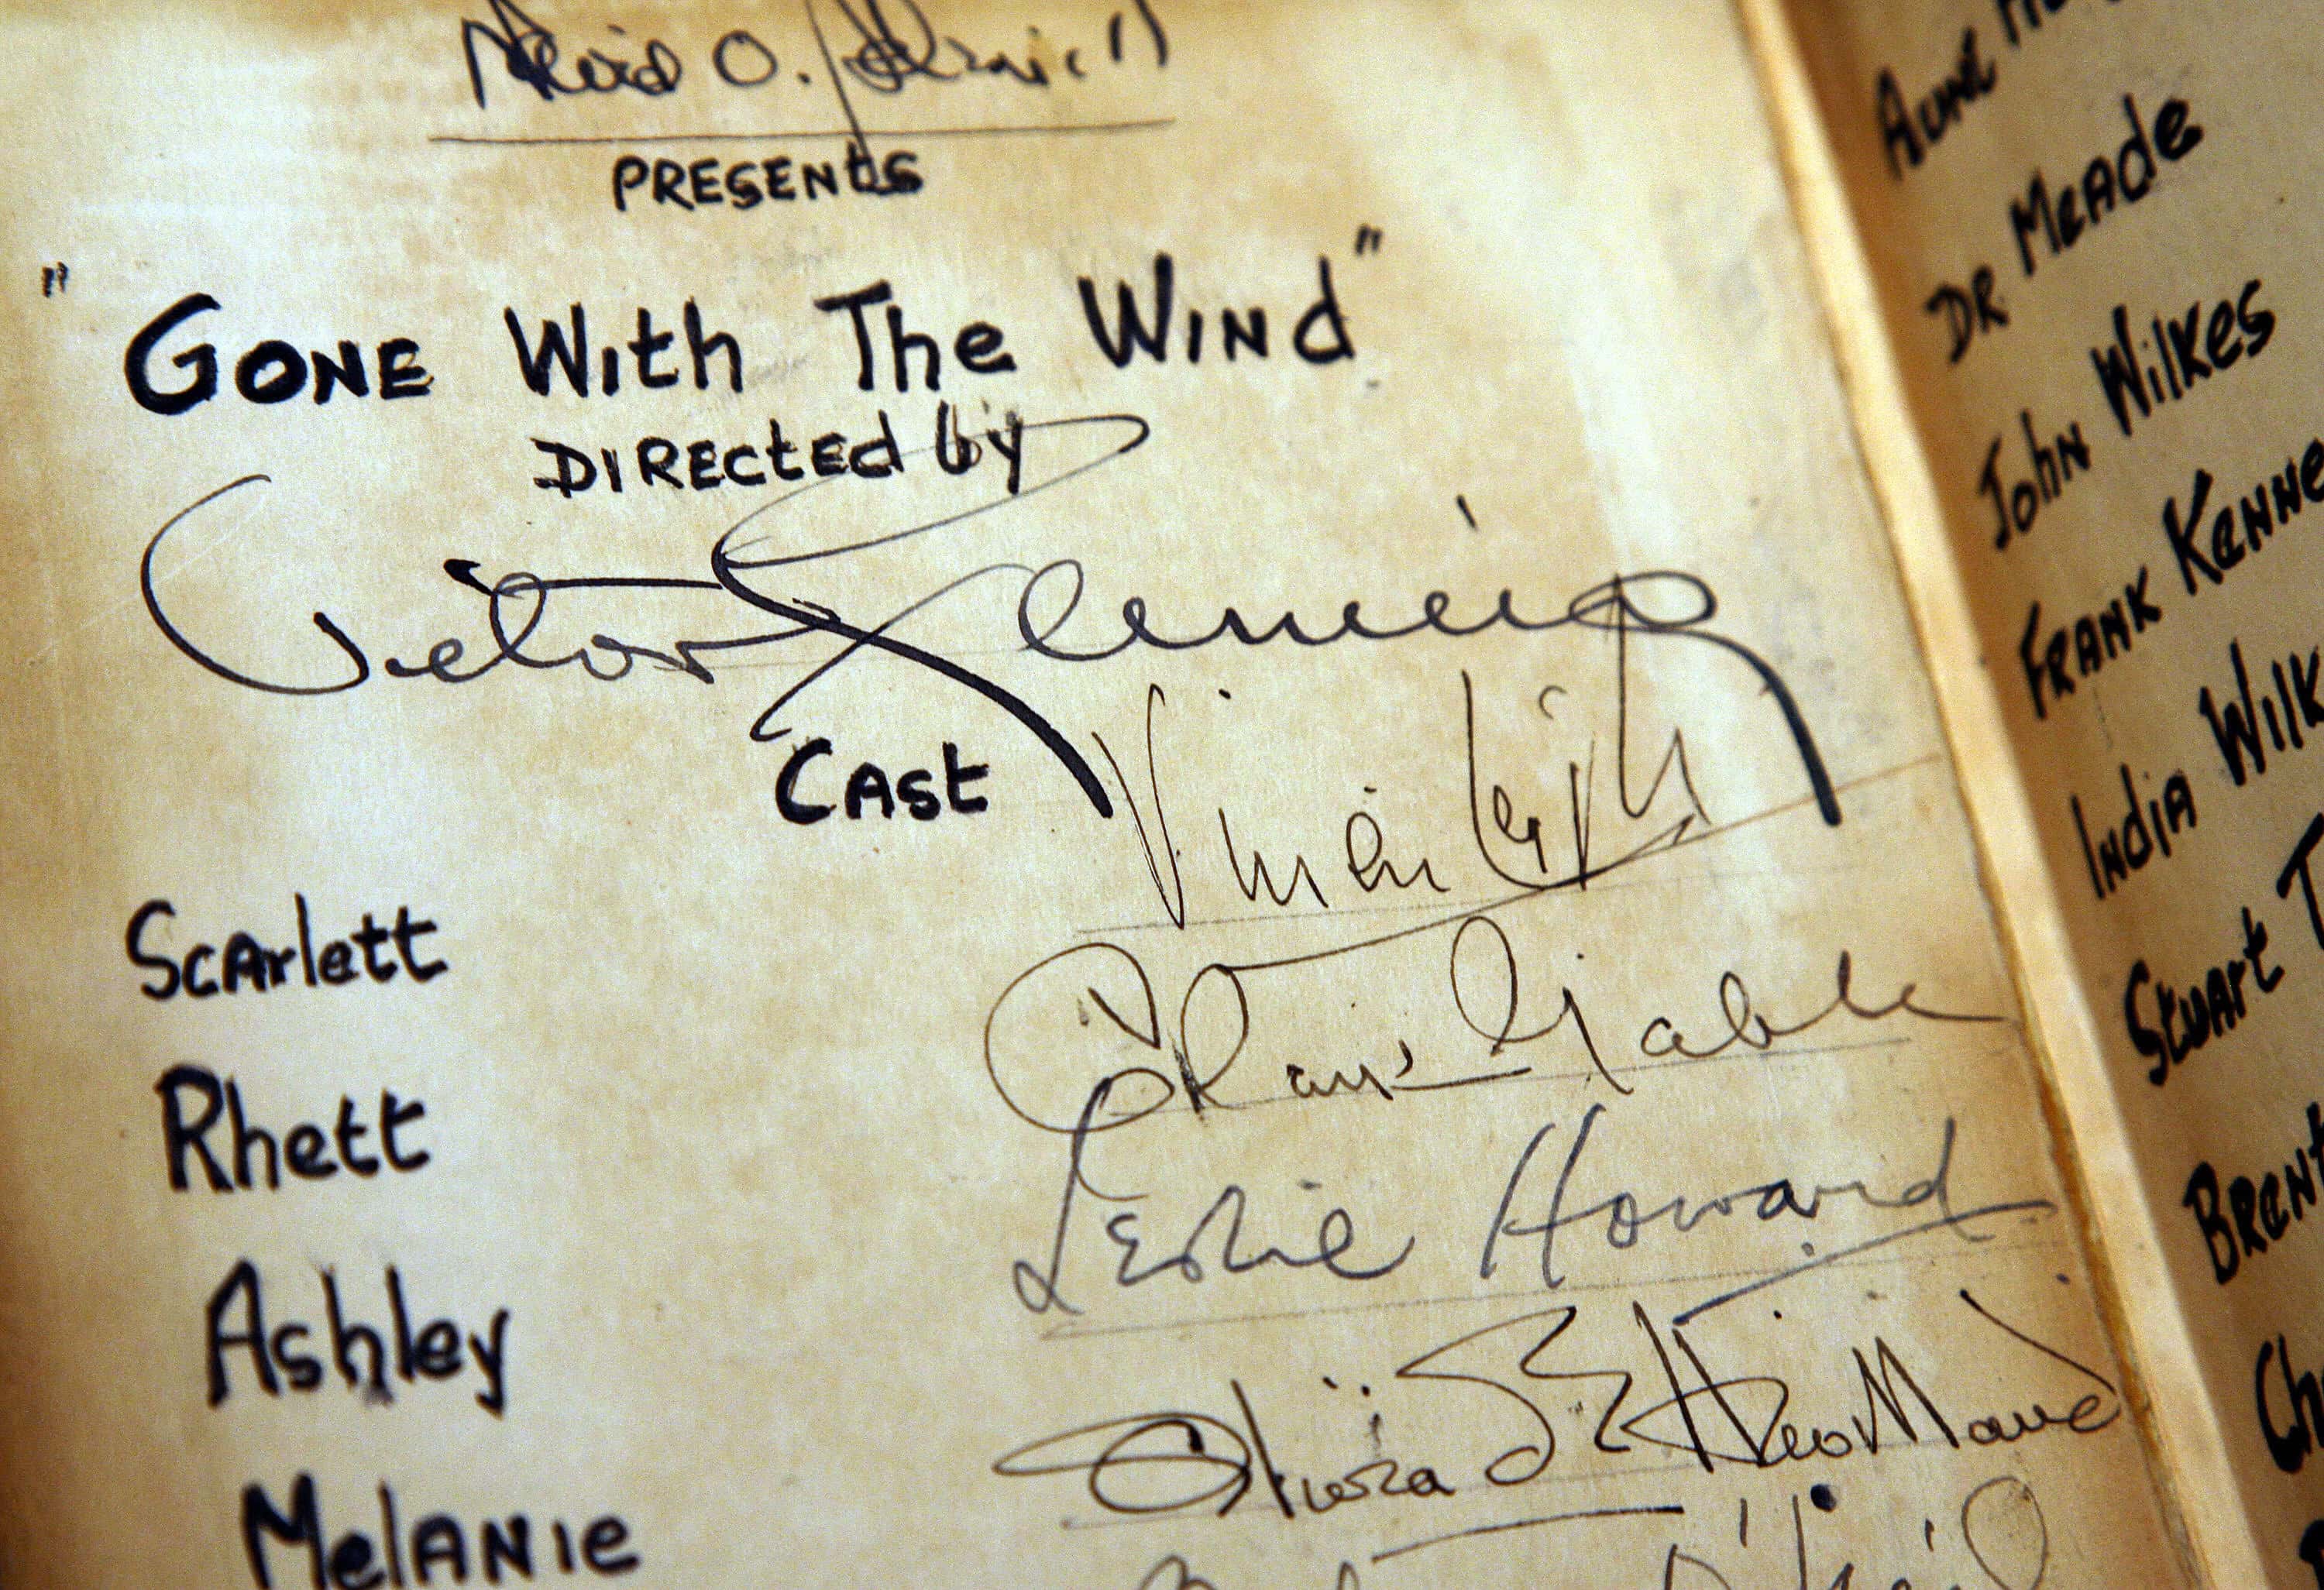 A copy of the book 'Gone With the Wind'.